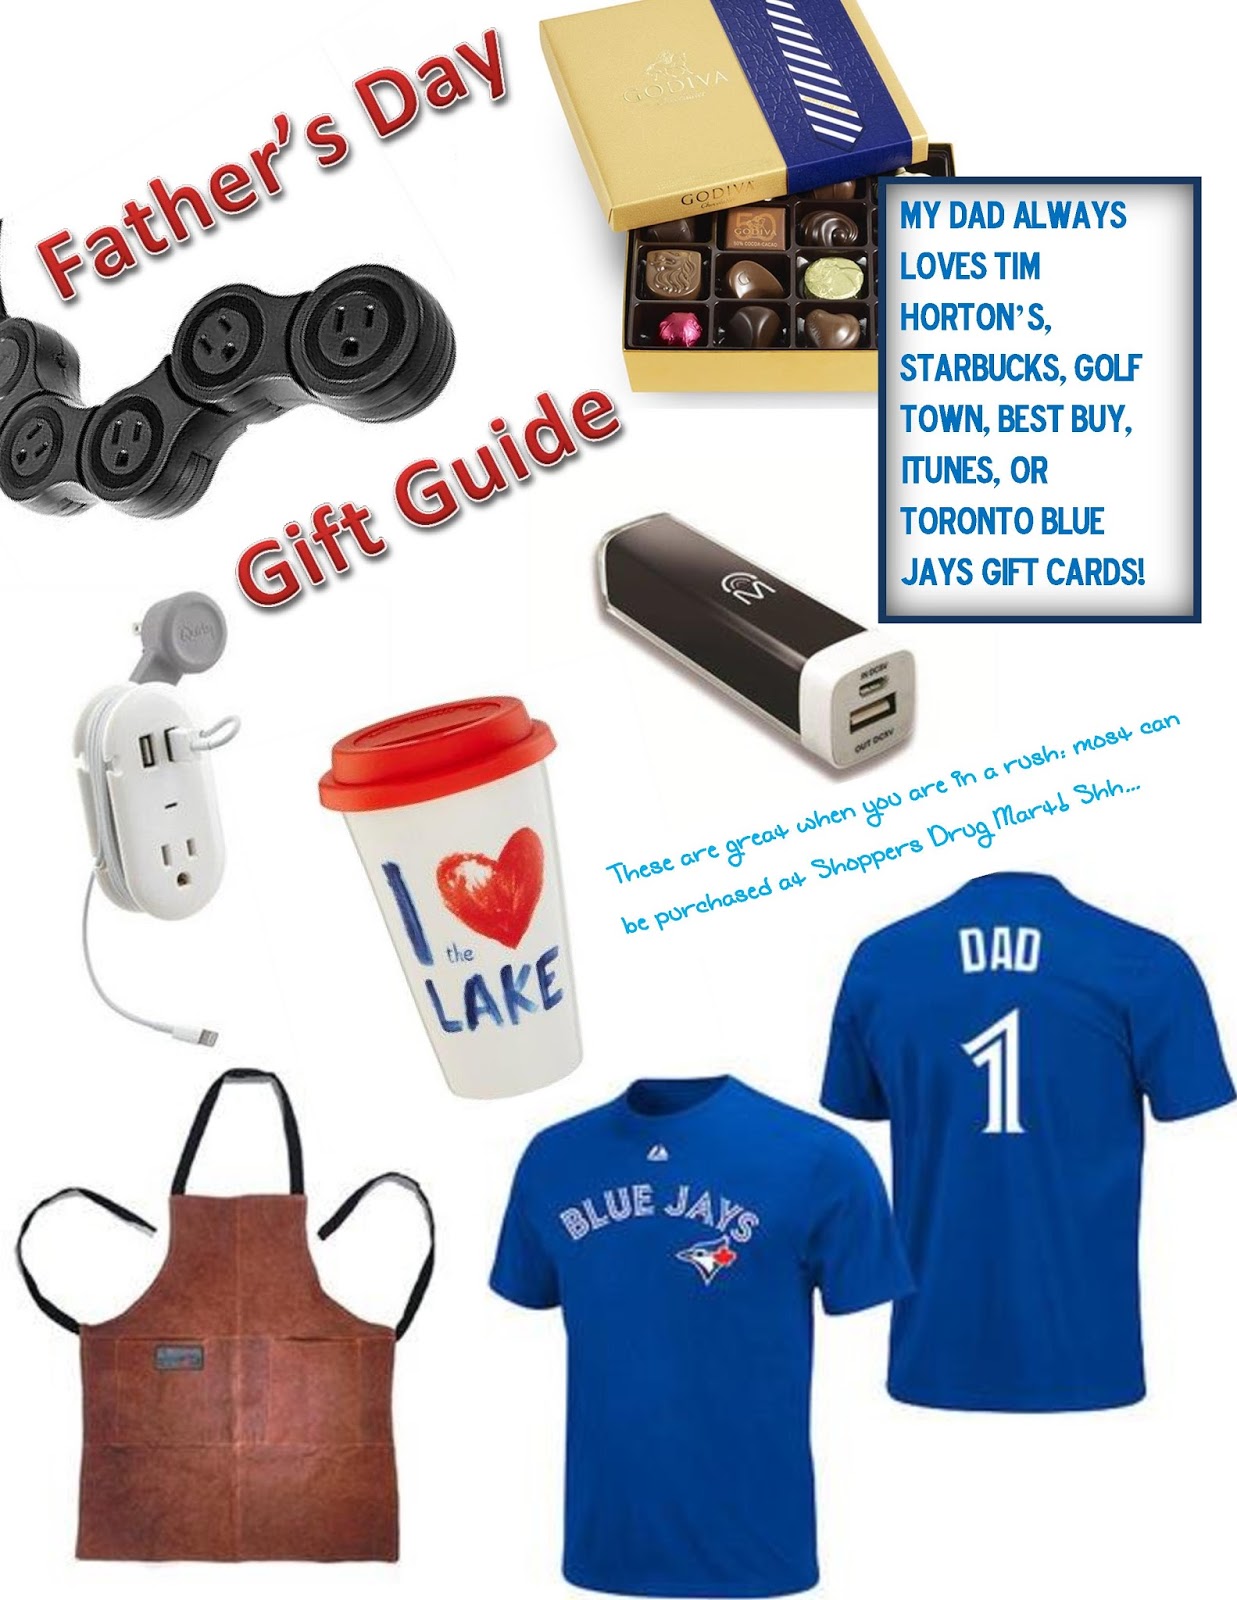 Classy on the Run: My Father's Day Gift Guide!